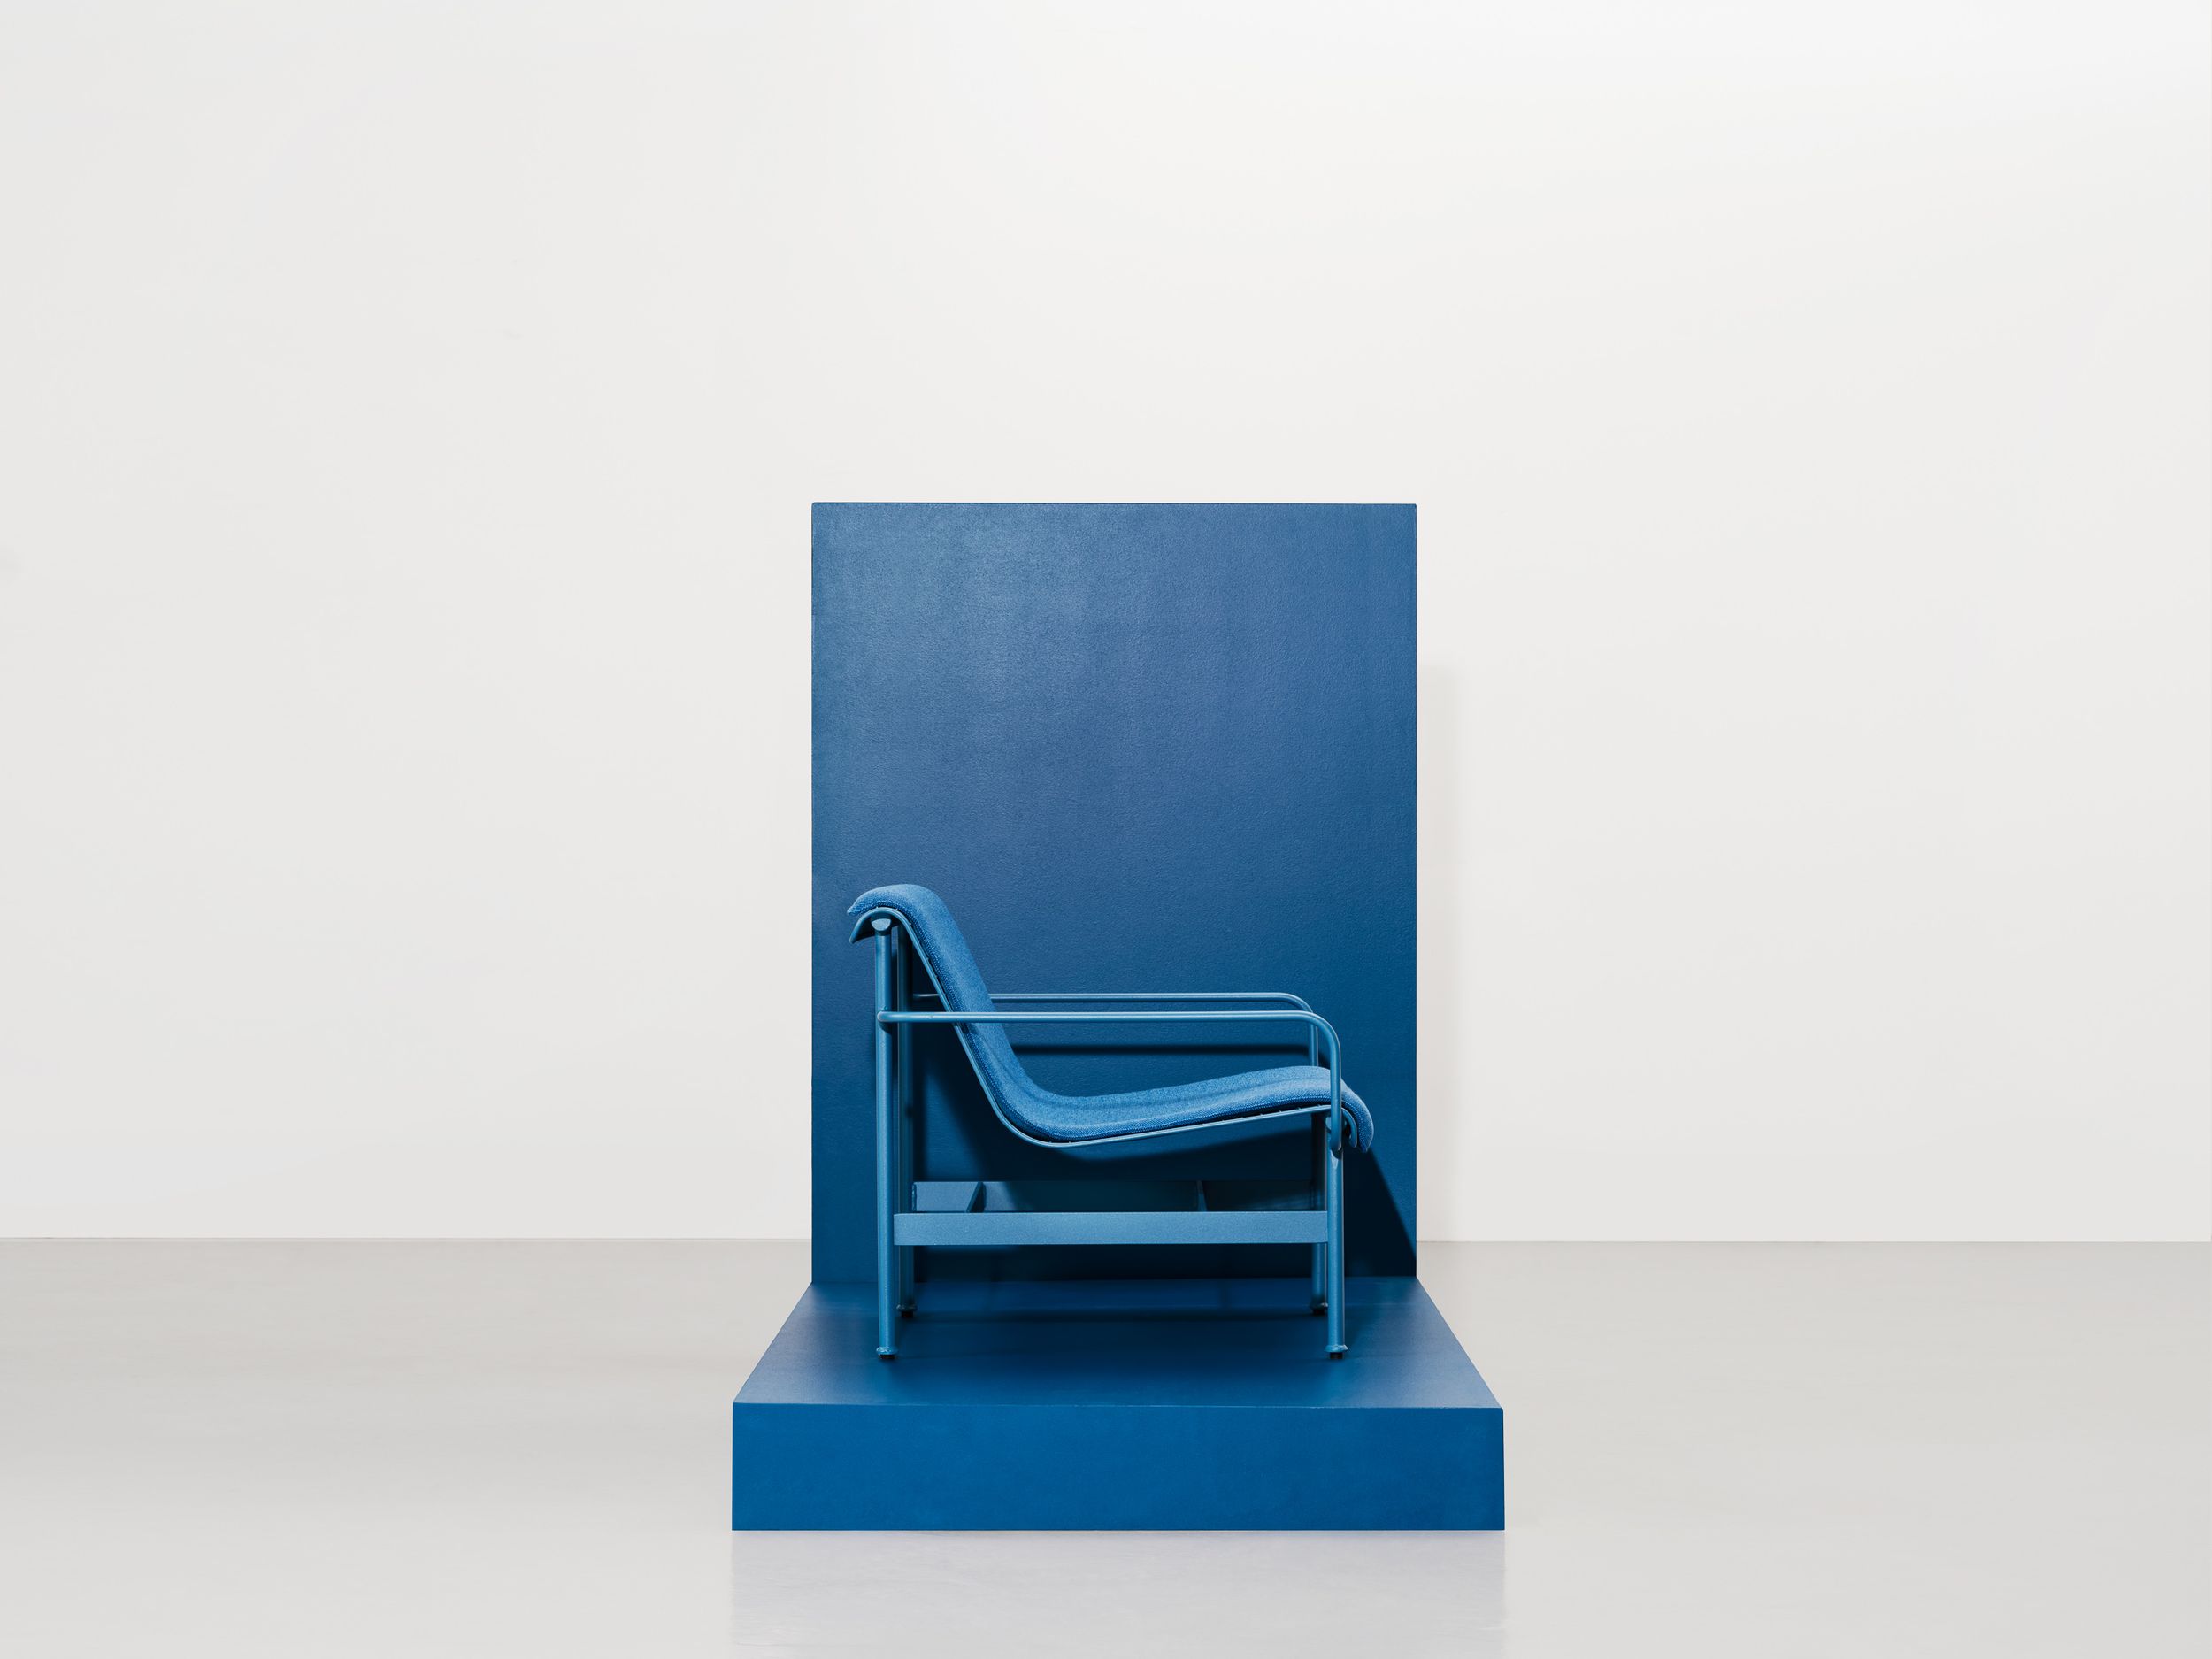 Munch Chair designed by Jonas Stokke and Andreas Engesvik for the Munch Museum in Oslo